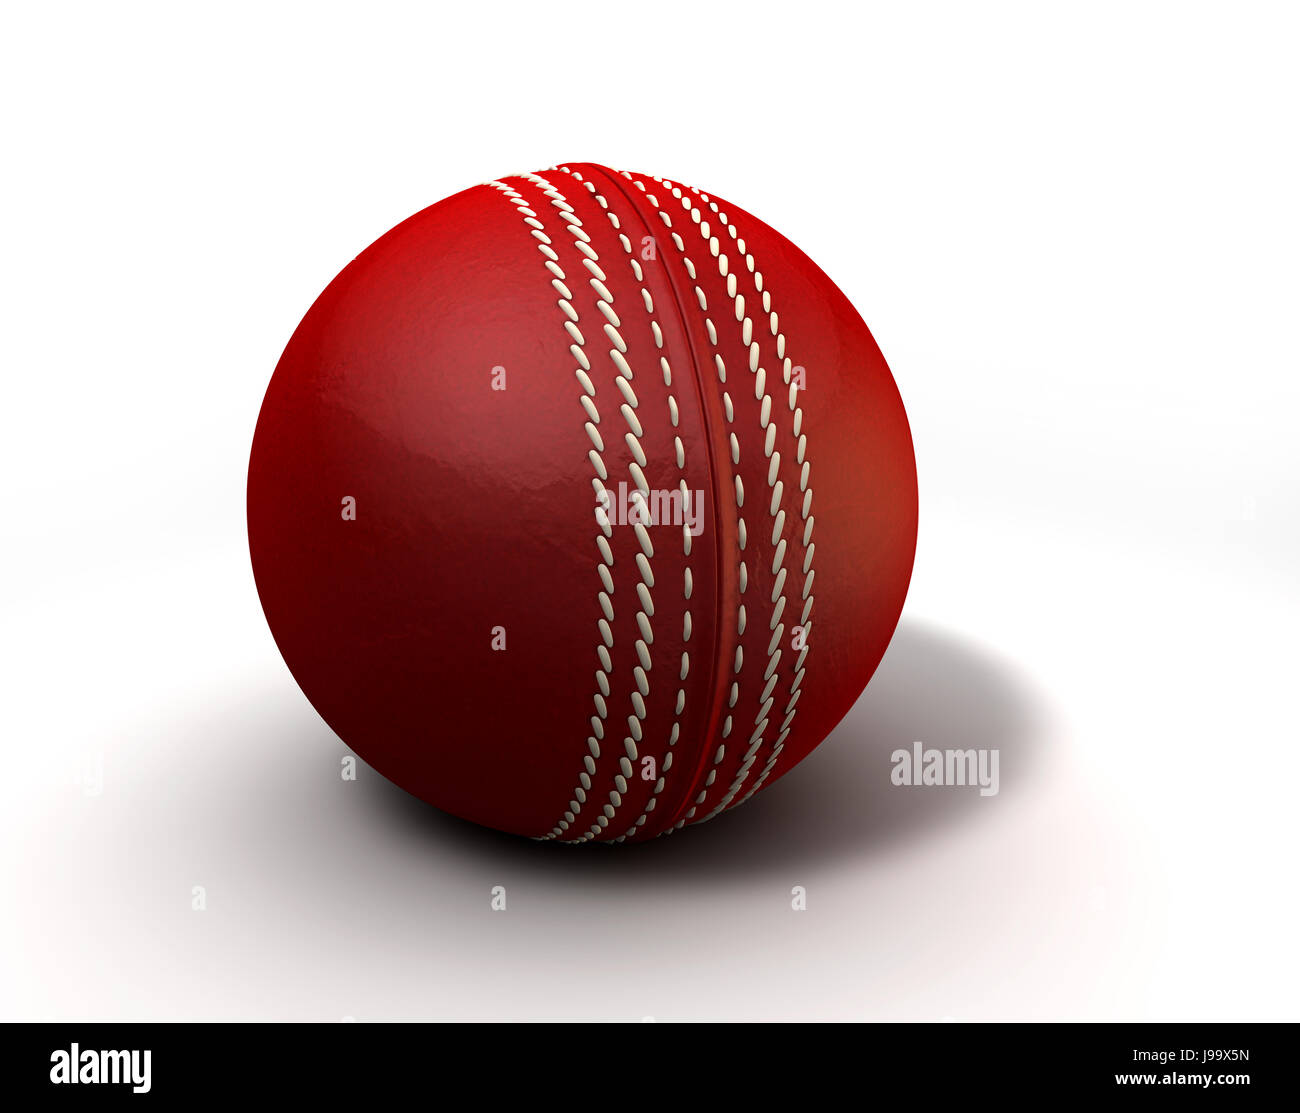 isolated, ball, leather, stitched, red, cricket, seam, cricket ball, stitched Stock Photo